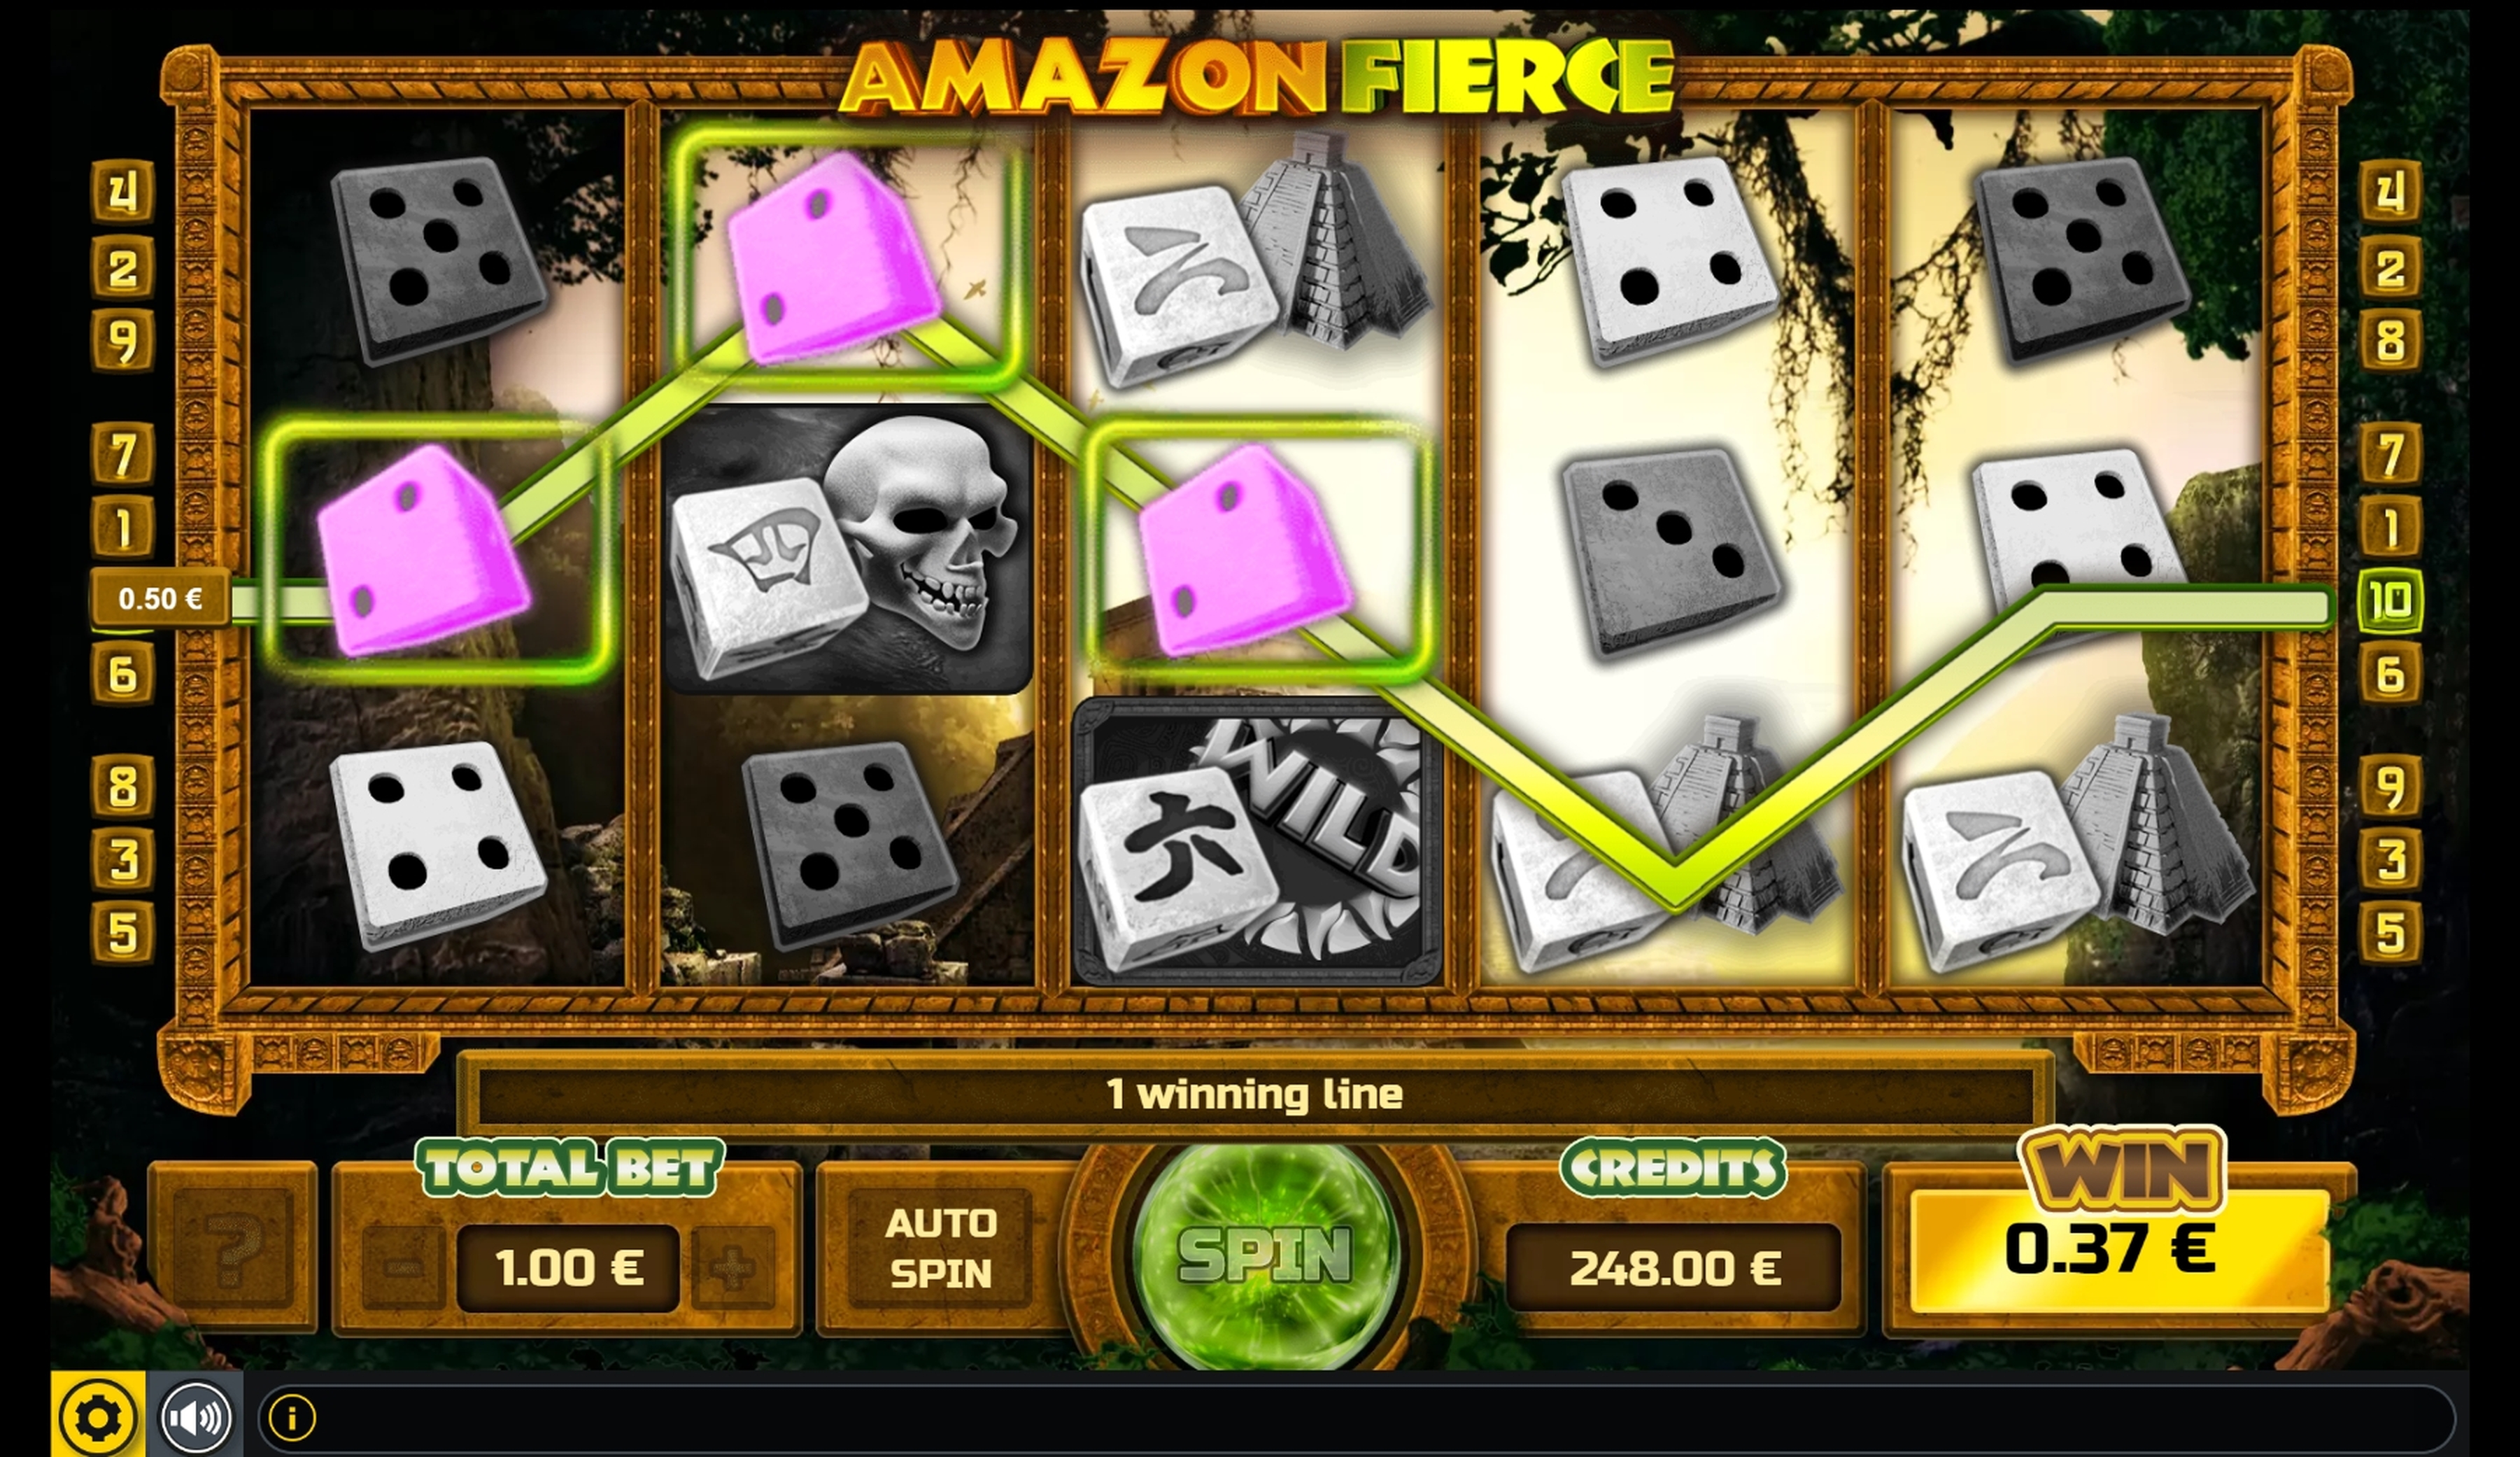 Win Money in Amazon Fierce Free Slot Game by GAMING1